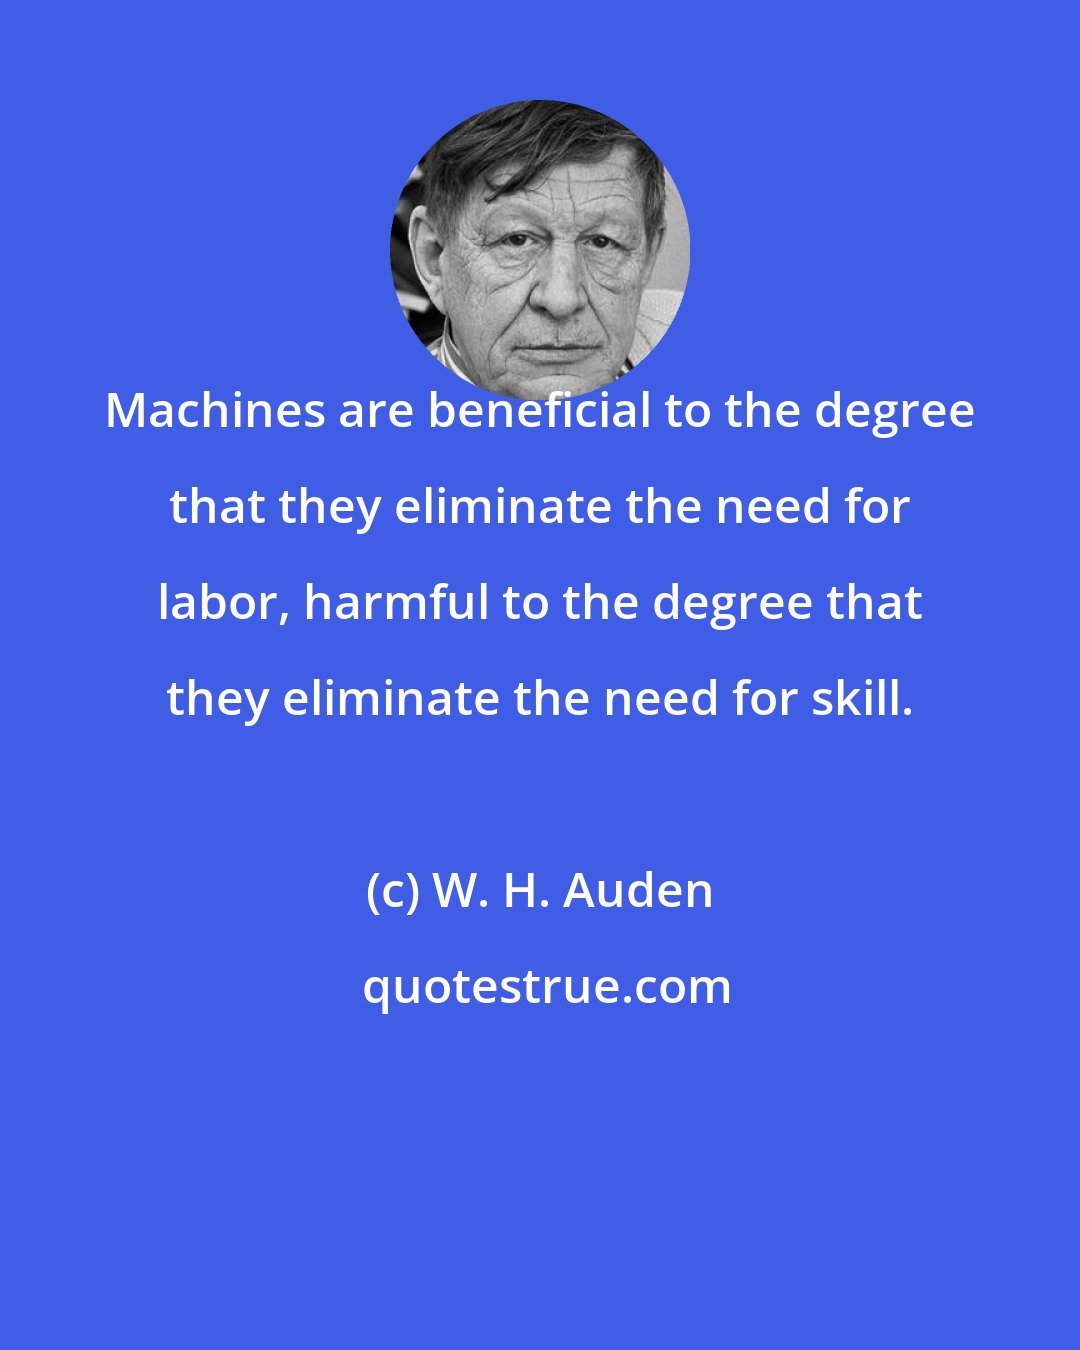 W. H. Auden: Machines are beneficial to the degree that they eliminate the need for labor, harmful to the degree that they eliminate the need for skill.